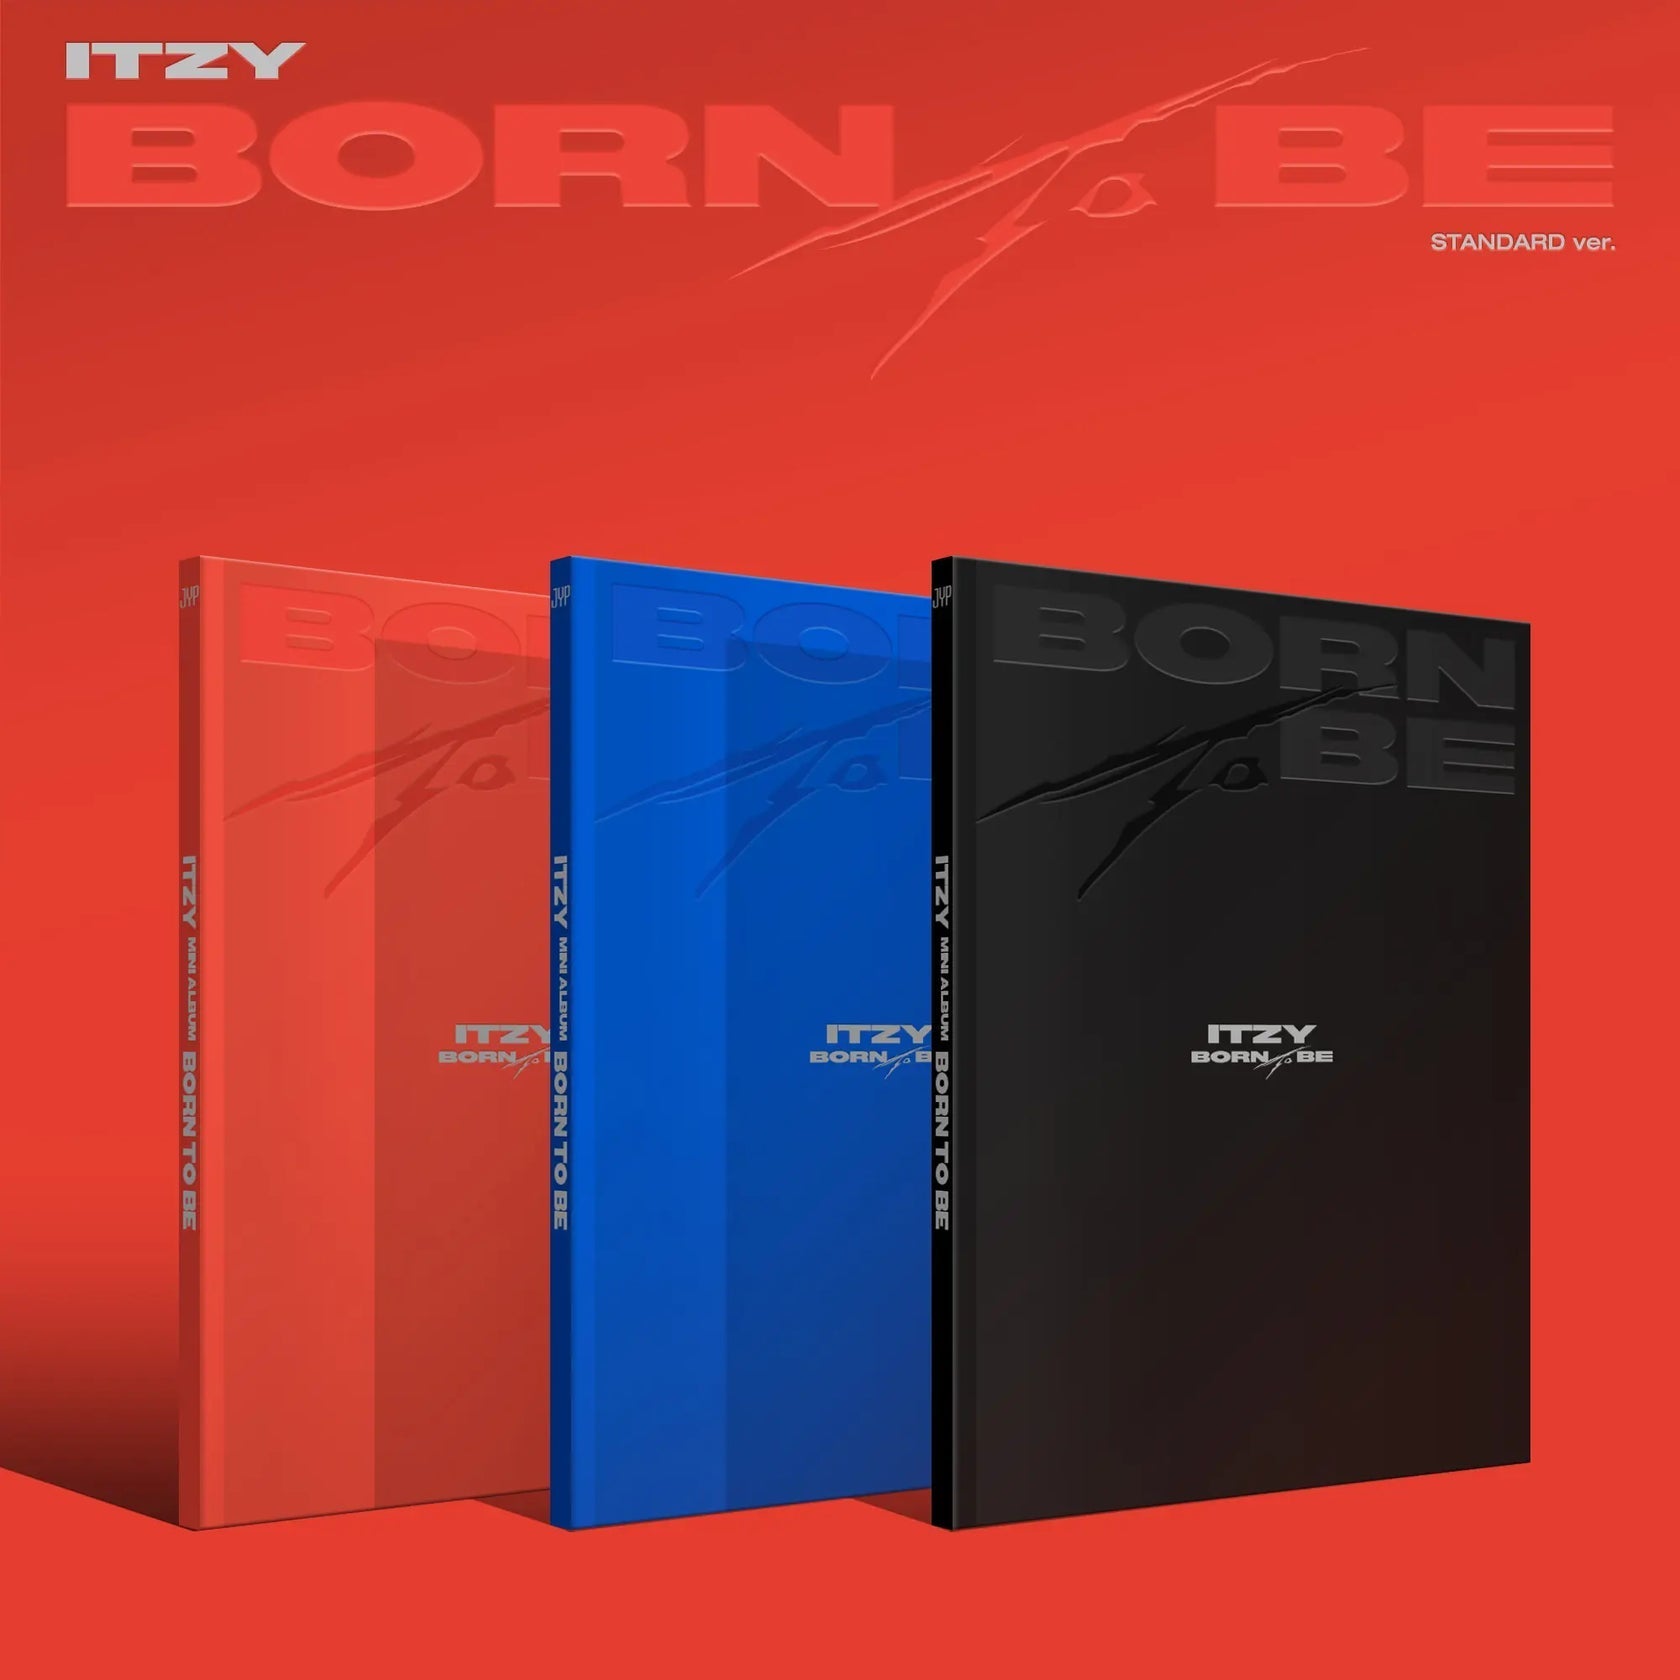 ITZY ALBUM 'BORN TO BE' COVER